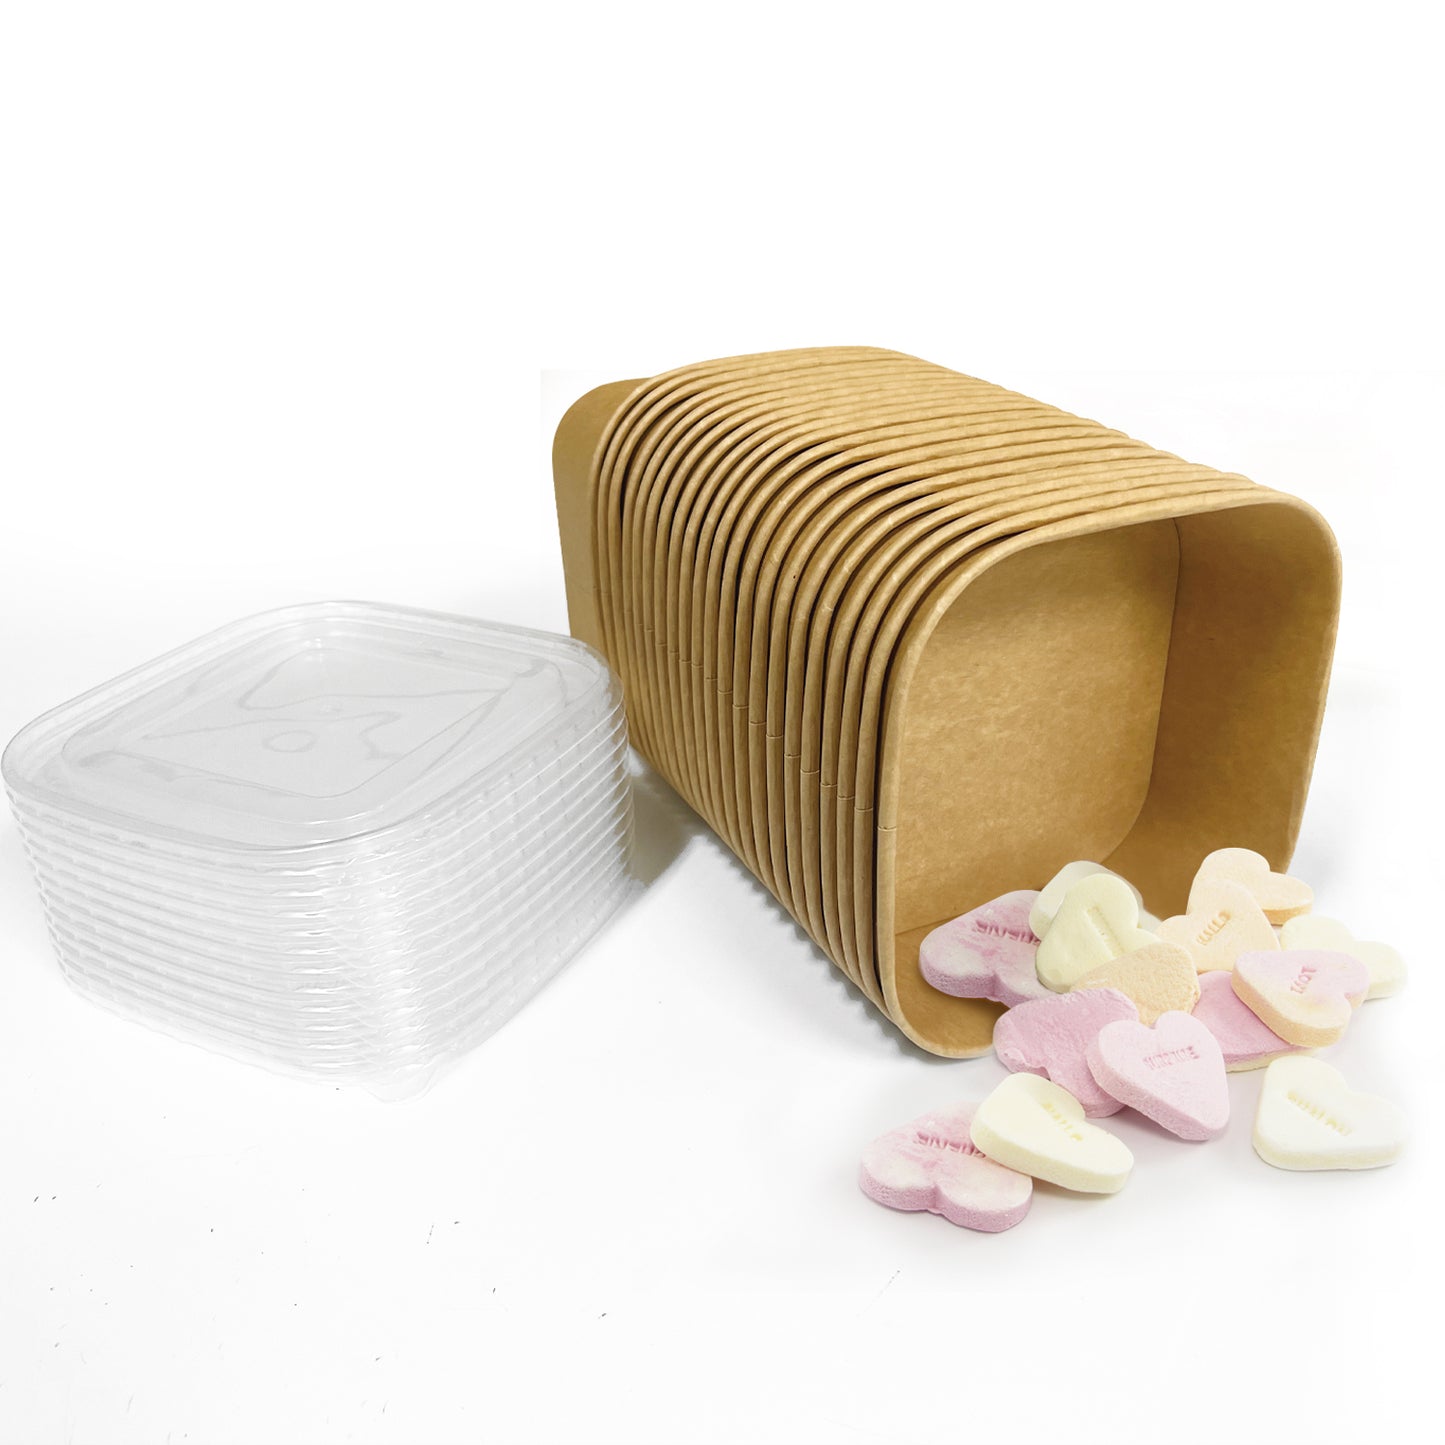 50 Sets/300 Sets, 44oz, 1300ml, Kraft Paper Square Containers, with PP Lids